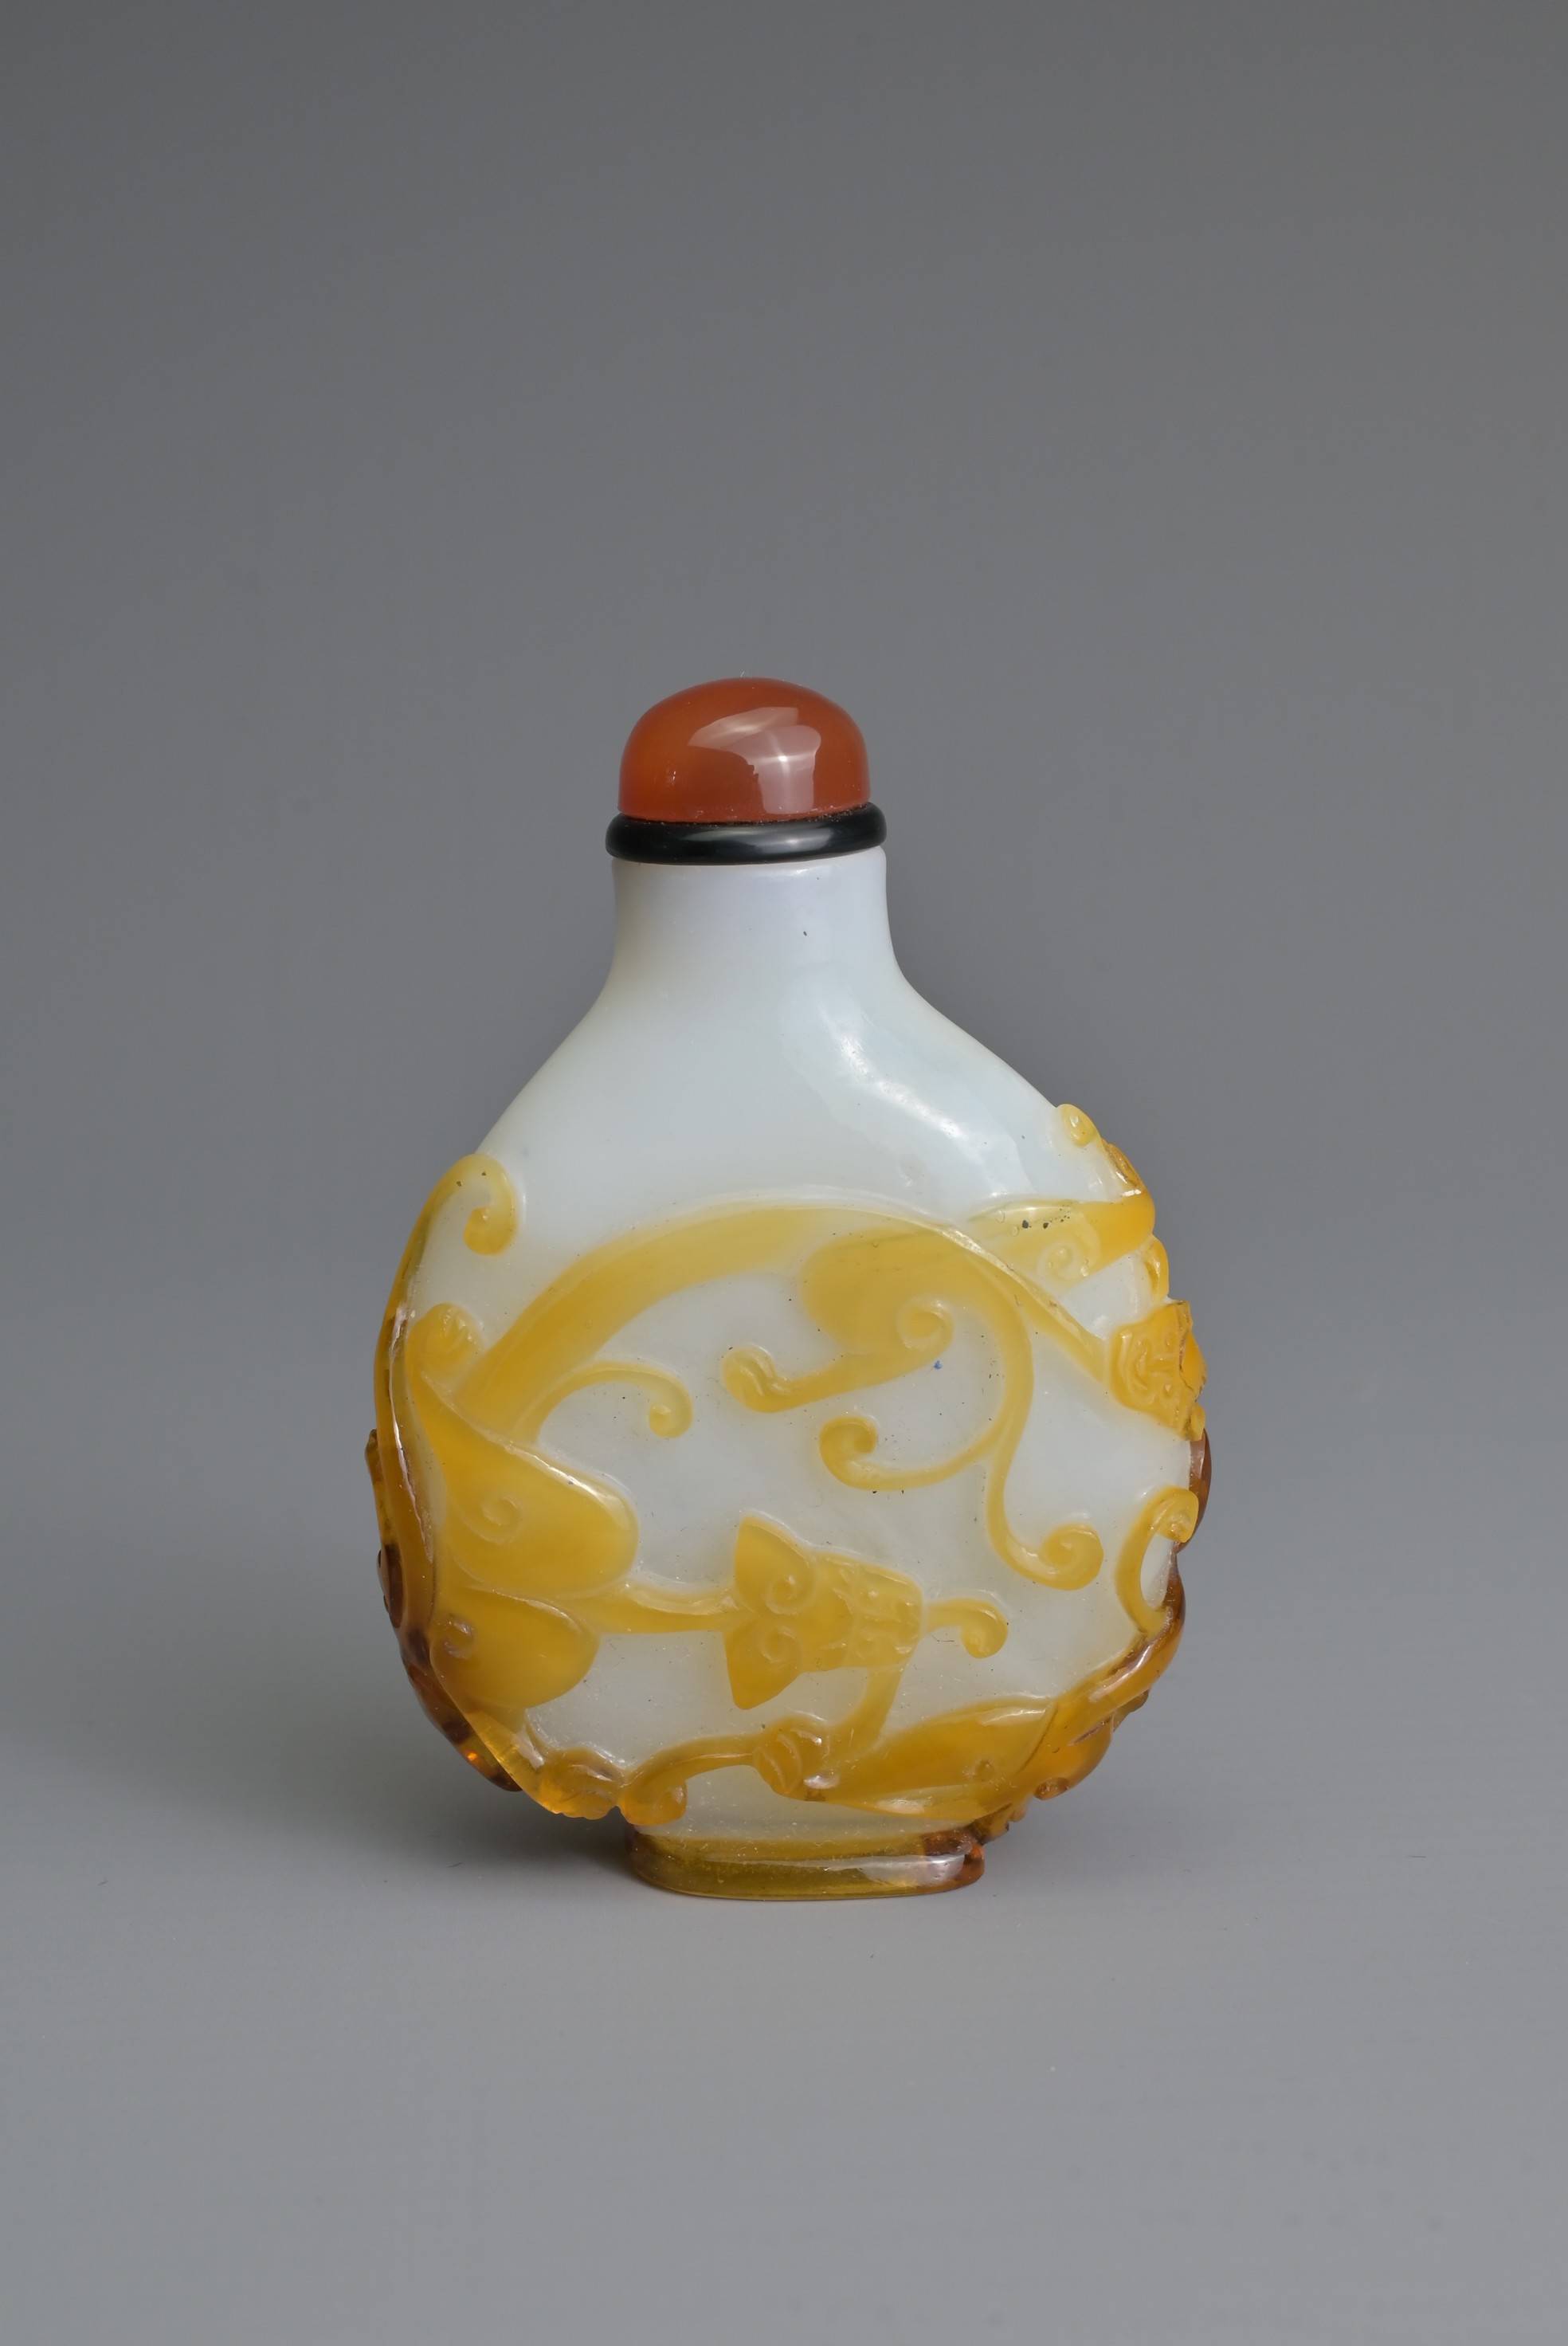 A CHINESE AMBER OVERLAY GLASS SNUFF BOTTLE, QING DYNASTY. Of flattened ovoid form featuring - Image 4 of 7